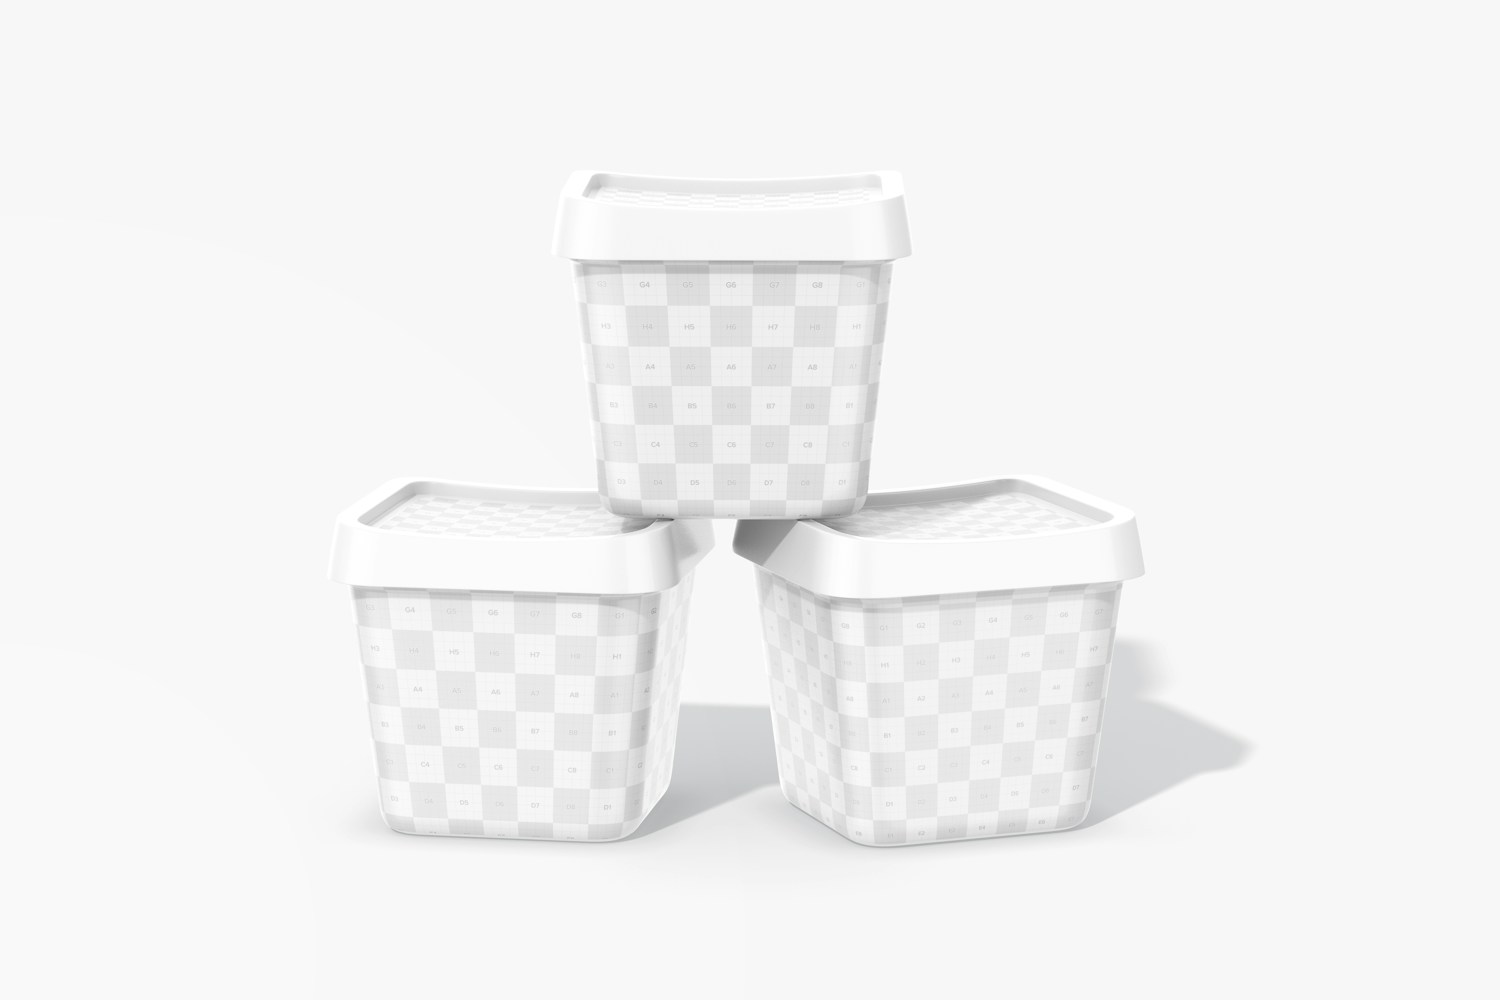 Plastic Ice Cream Containers Mockup, Stacked